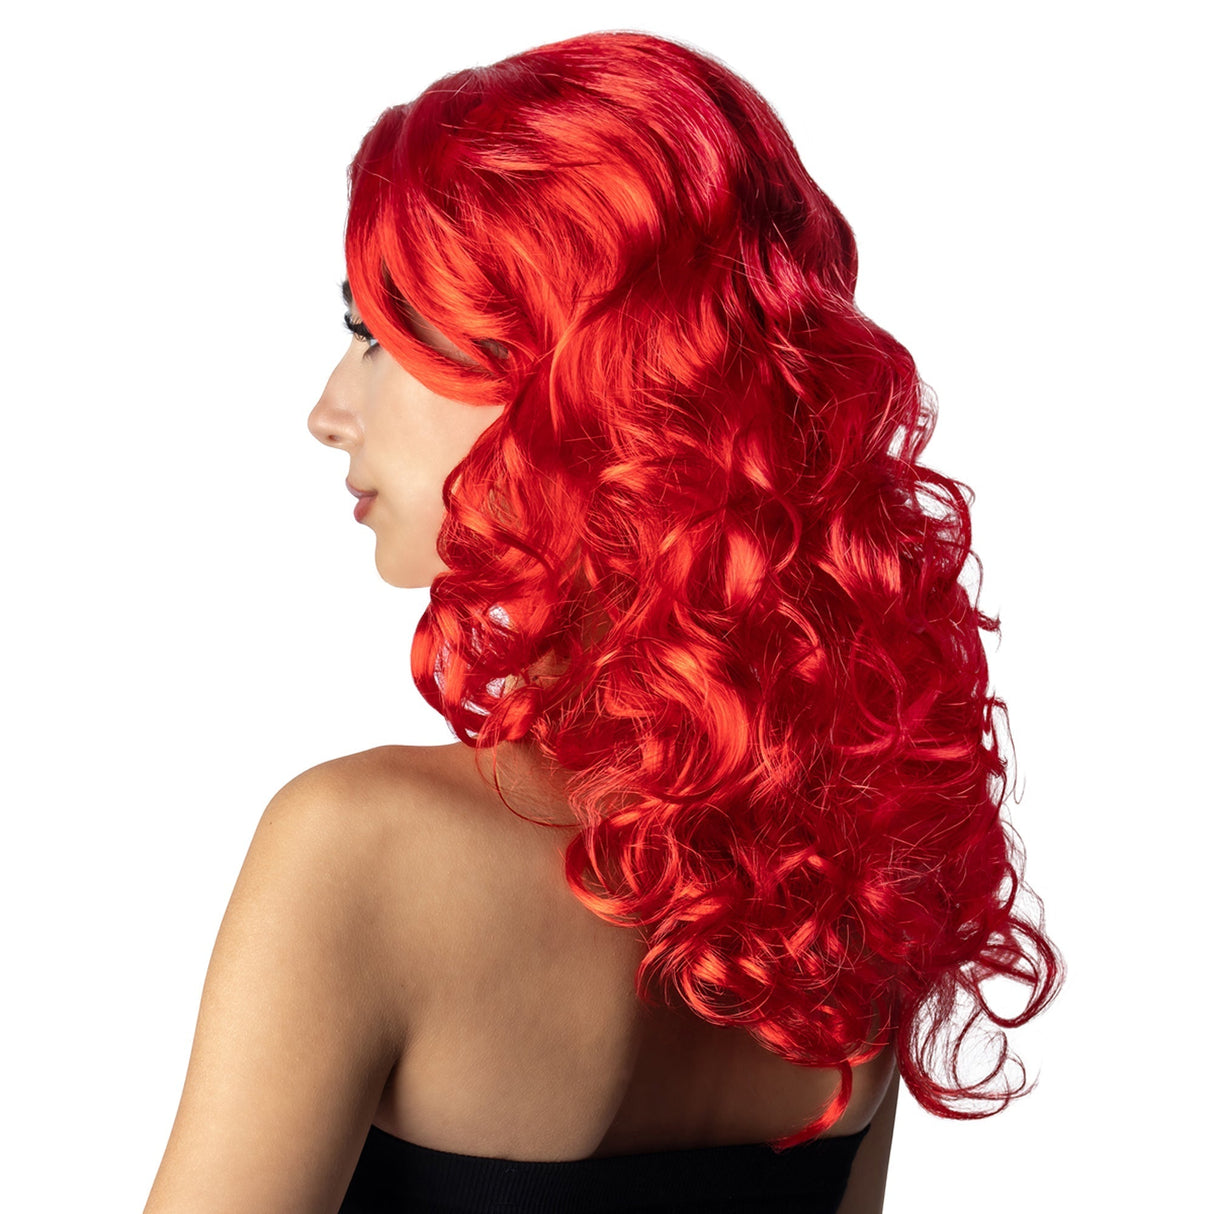 ANXIN WIG FACTORY Costume Accessories Wavy Red Wig for Adults 810077656693